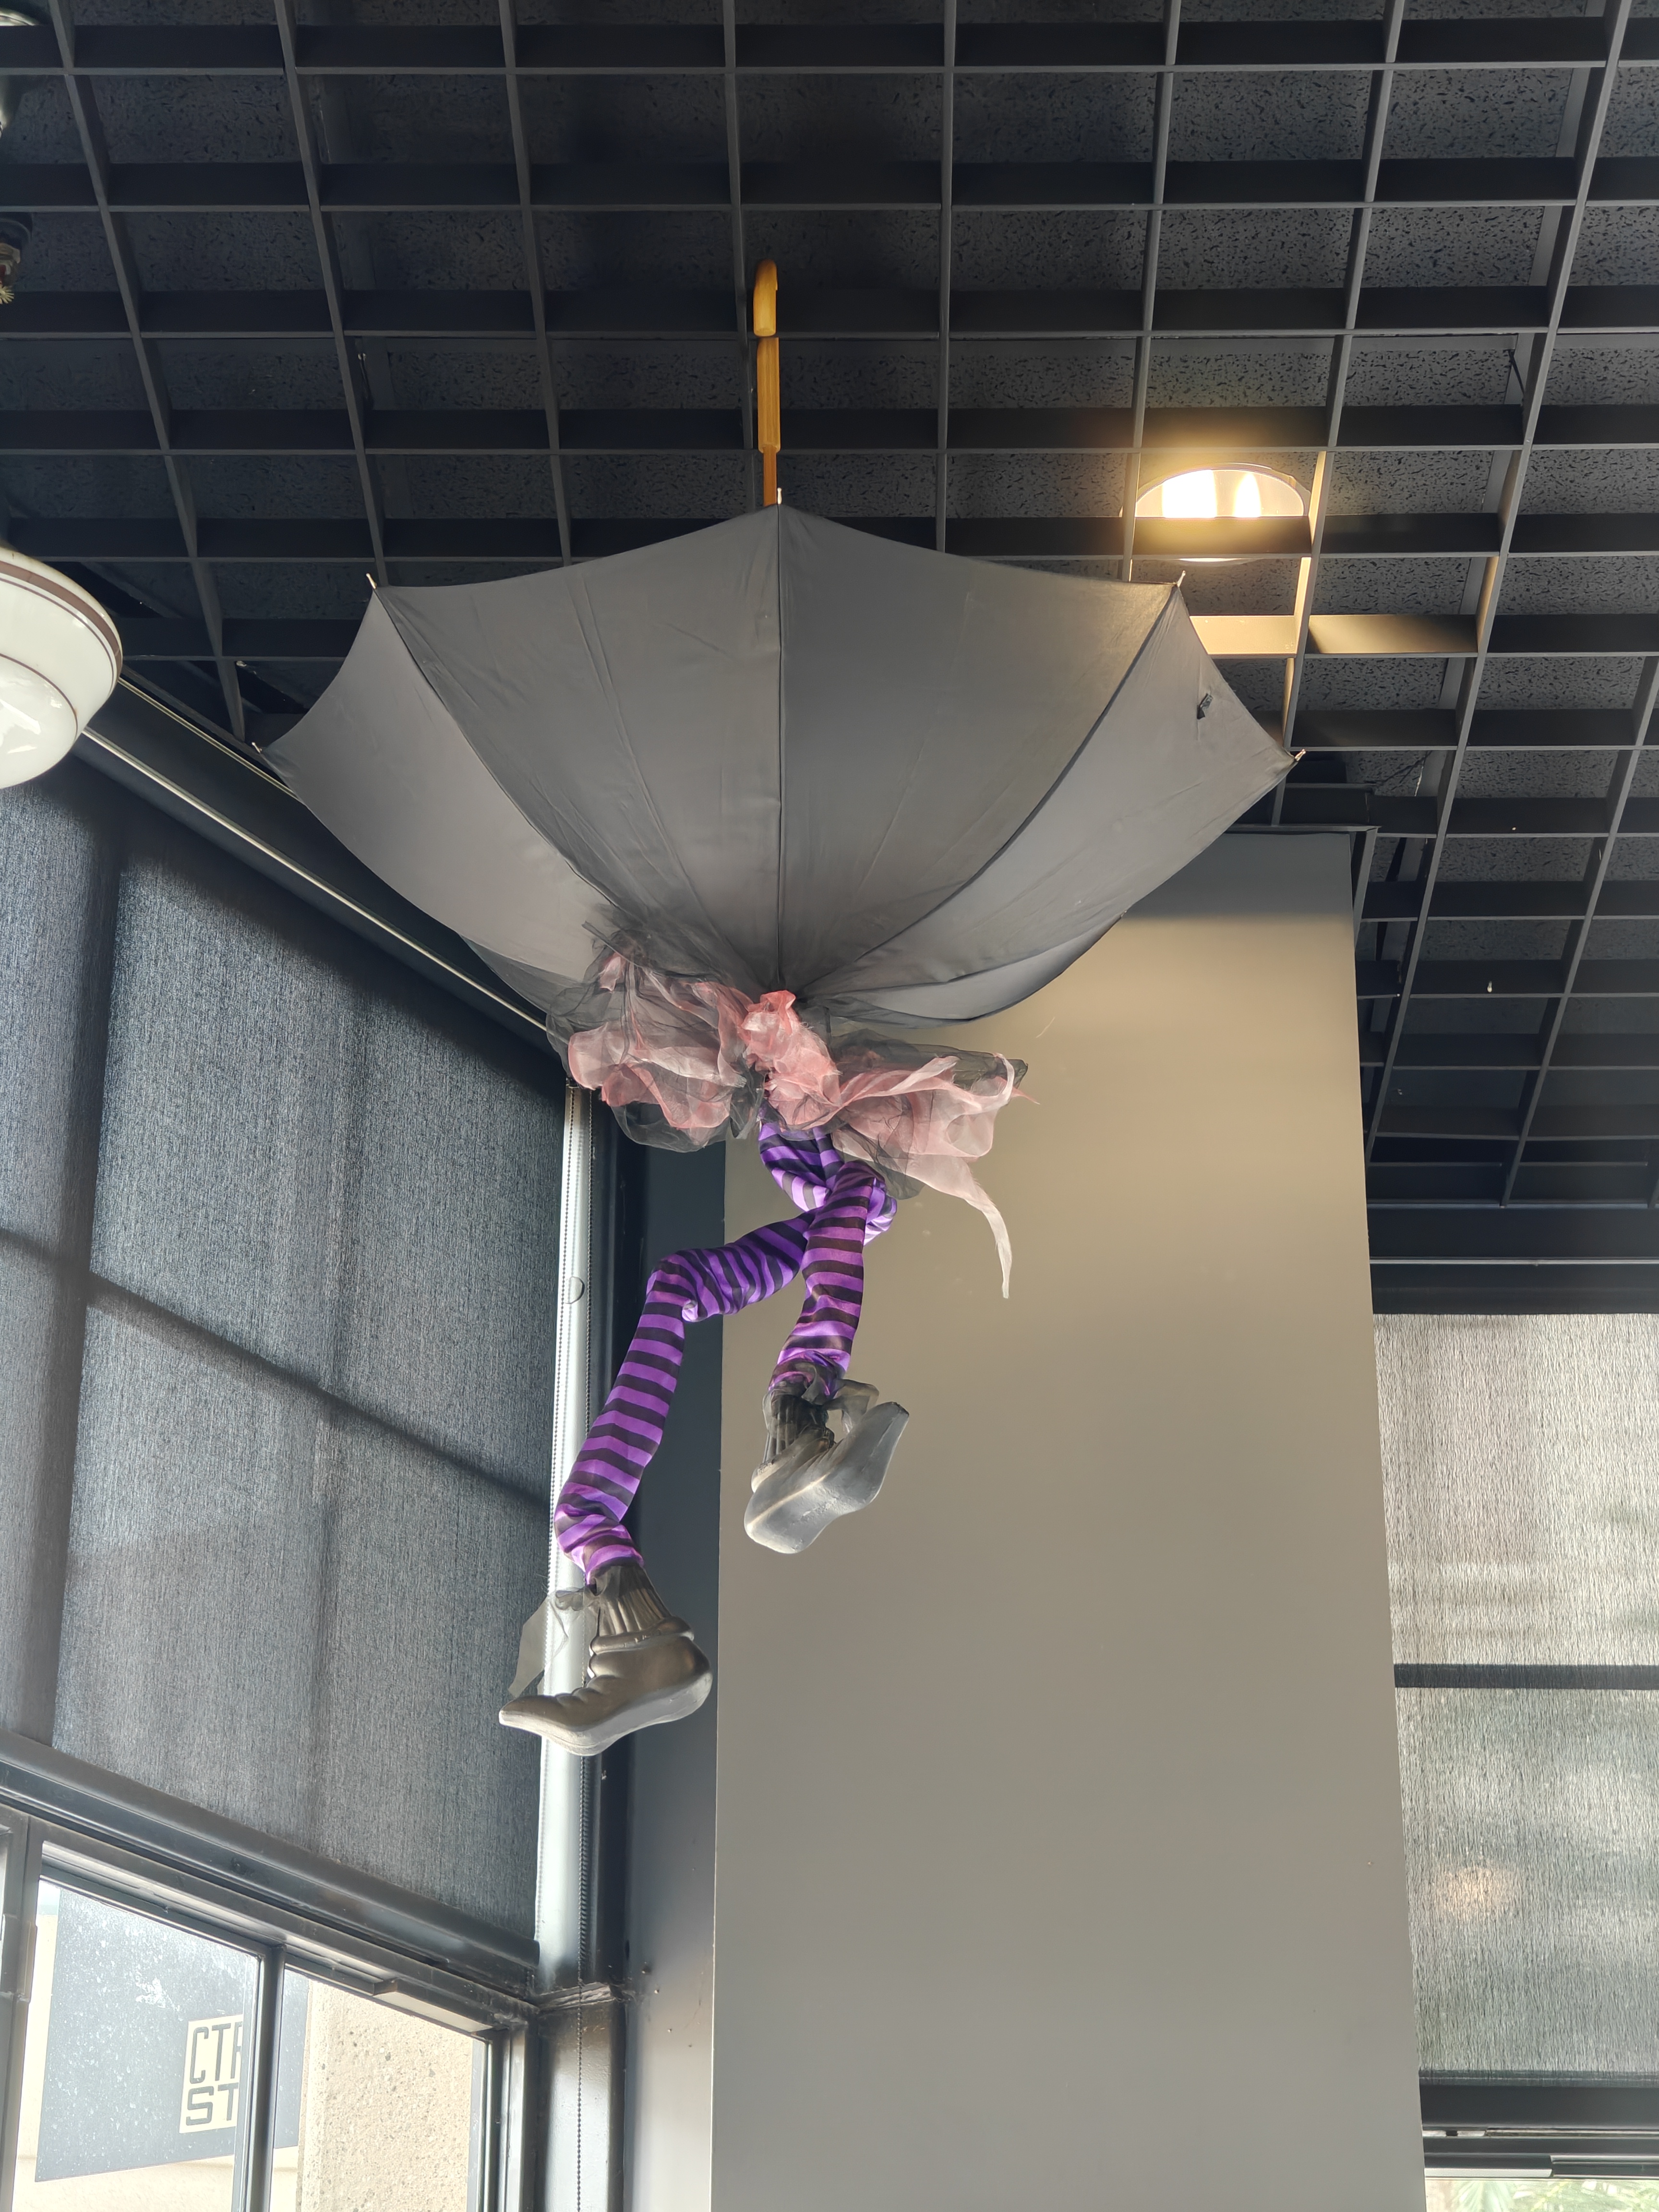 Witch crashed in ceiling decoration taken on OnePlus Open.